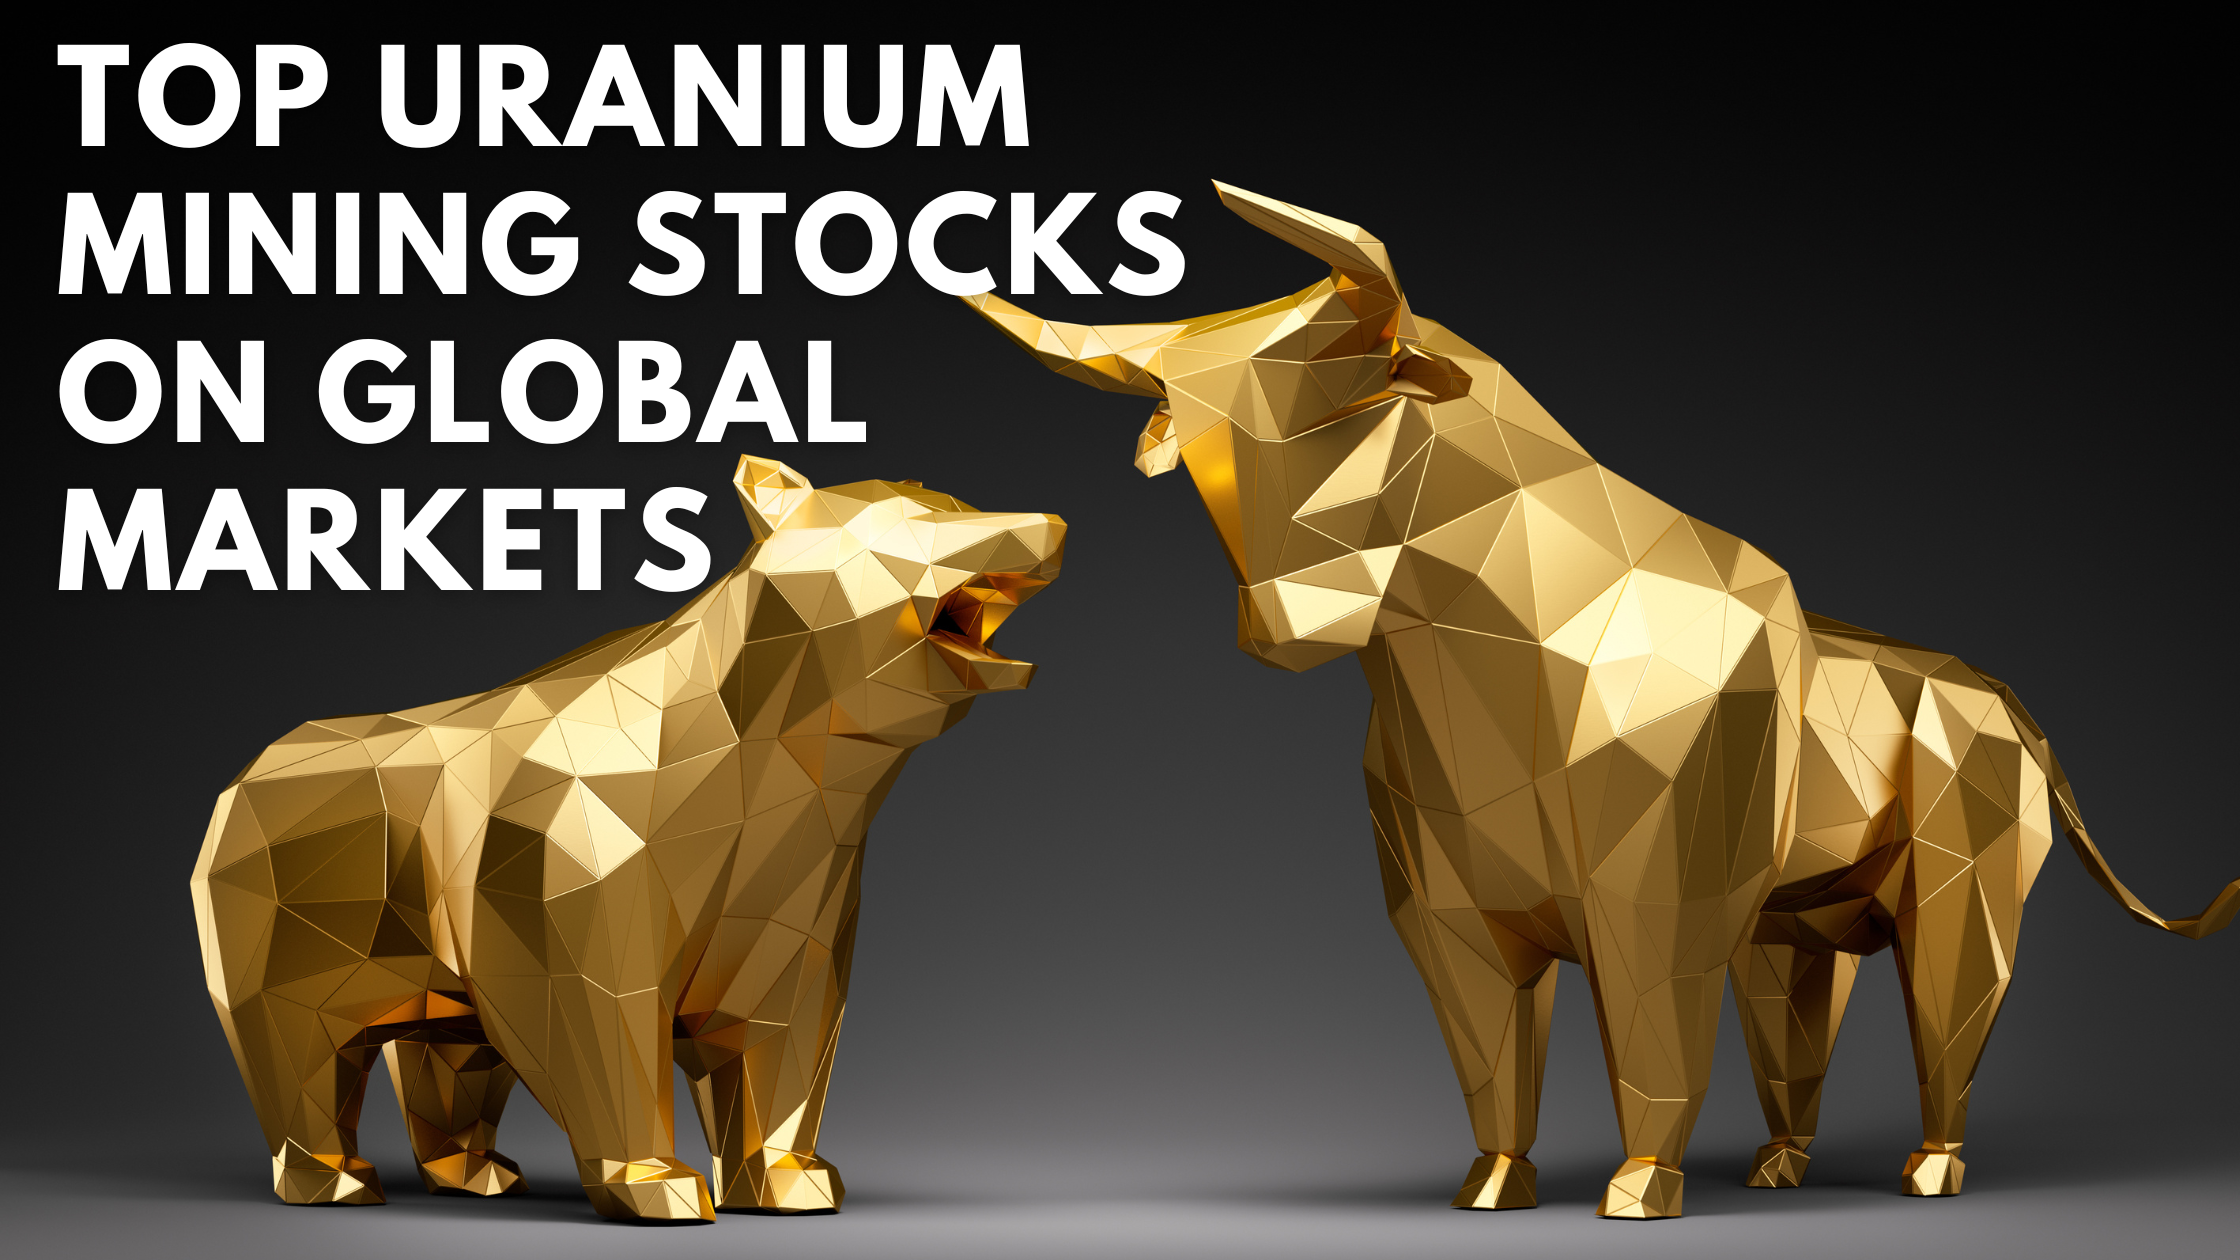 Top uranium mining stocks on global markets, across to consider as a new age dawns for nuclear energy